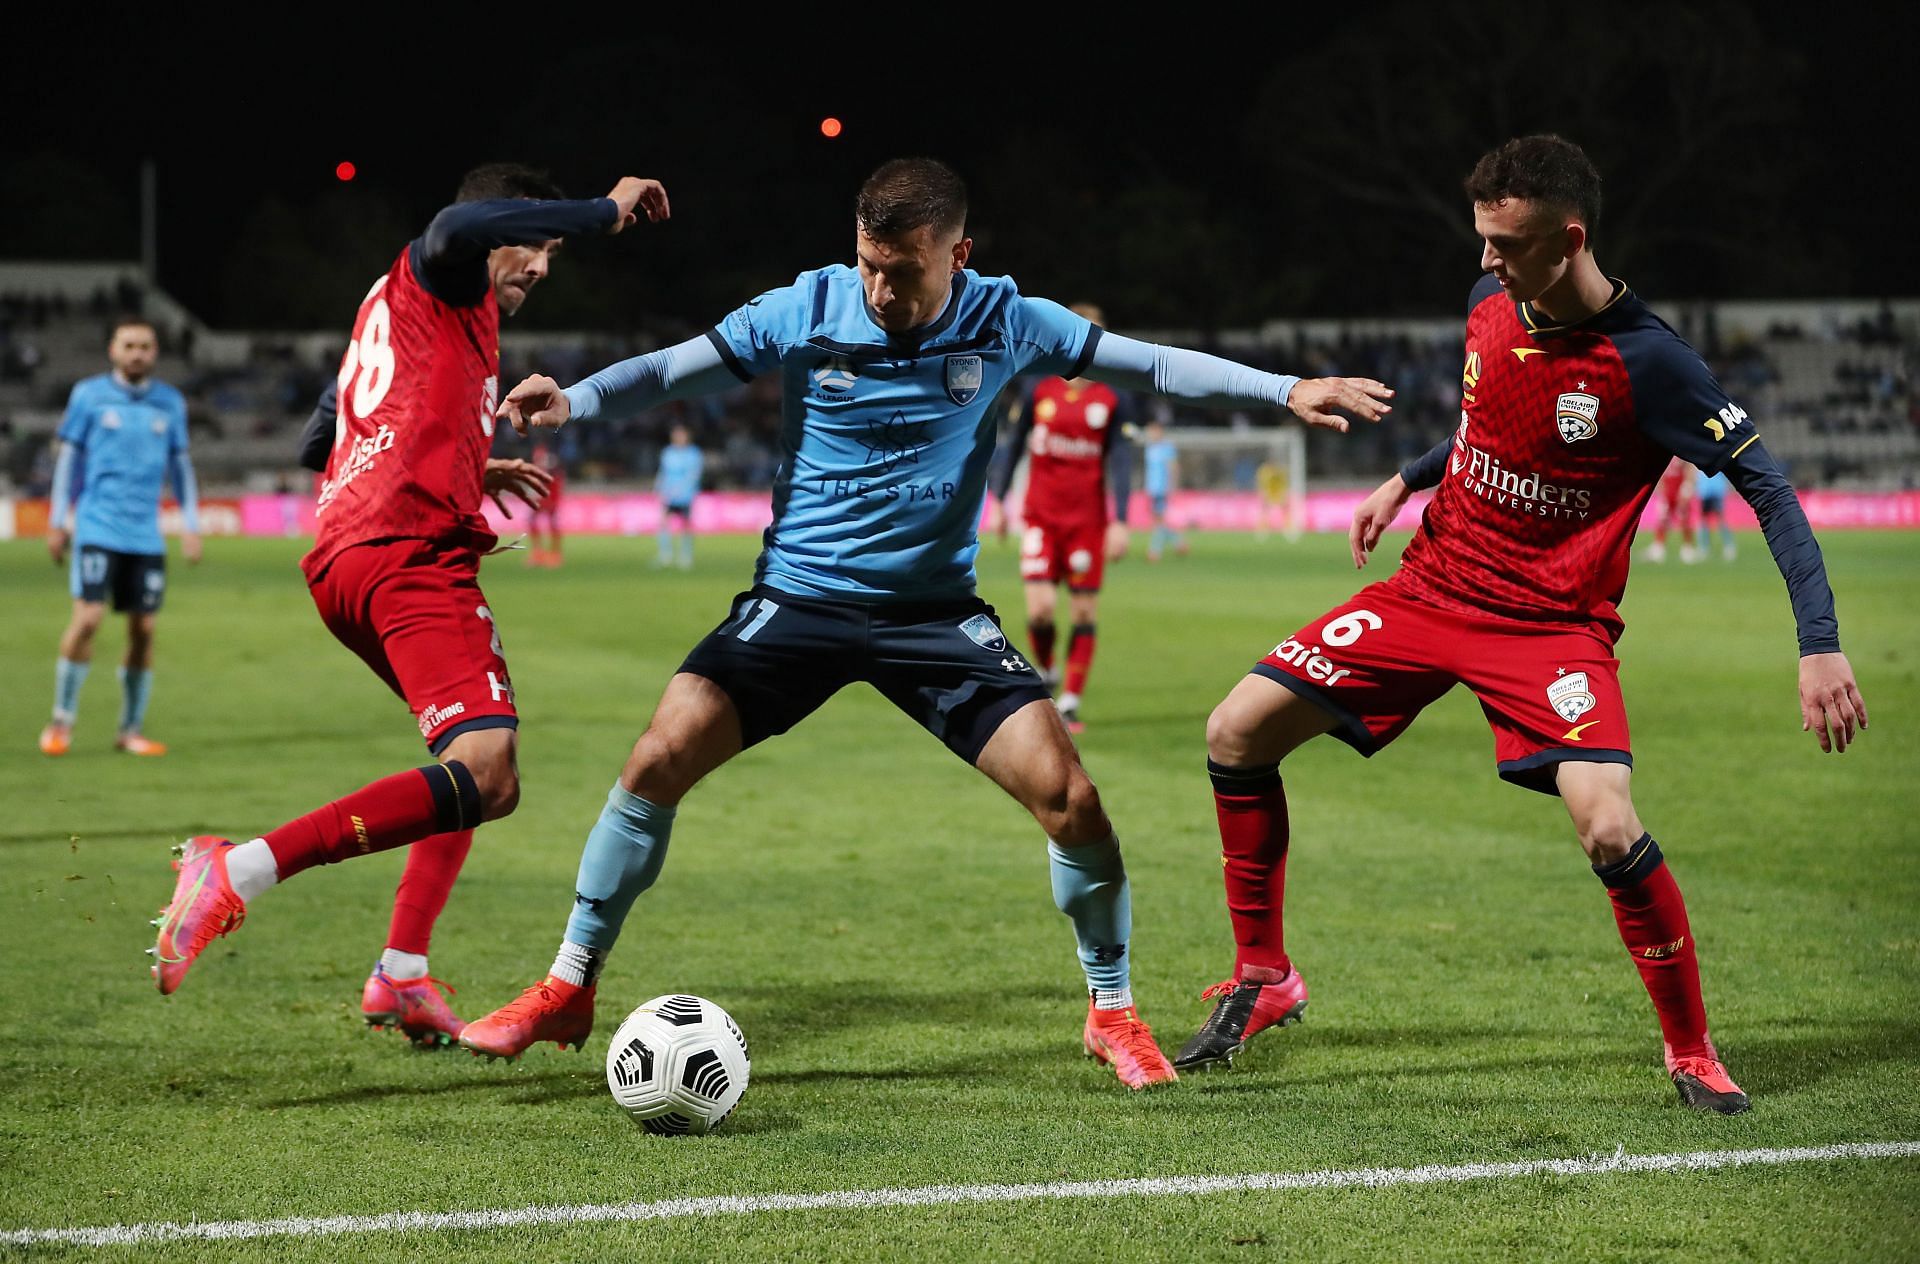 Adelaide United take on Sydney FC this weekend